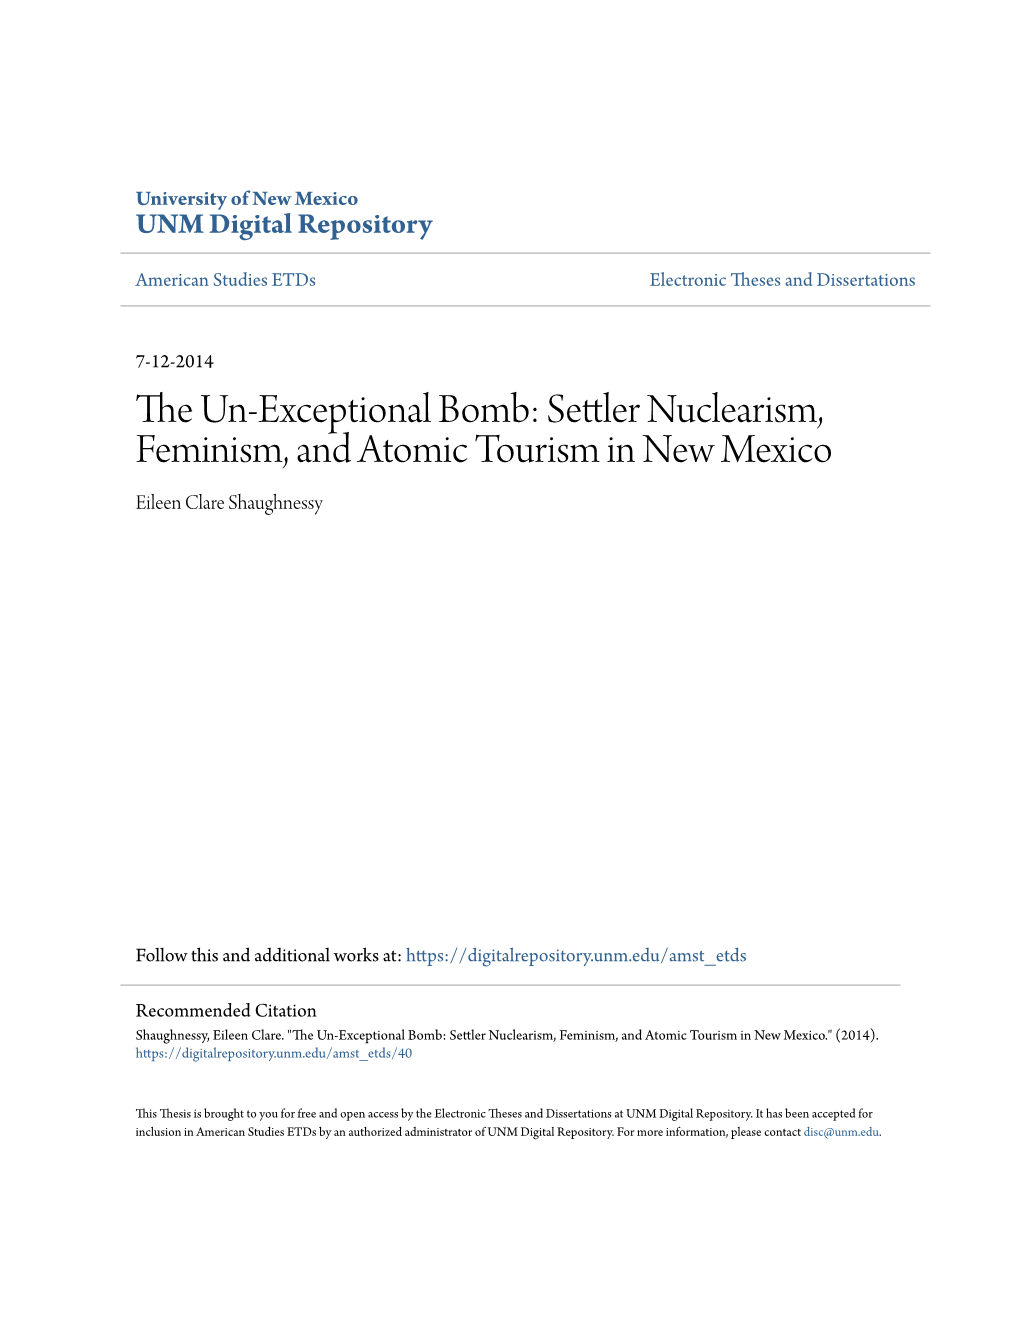 Settler Nuclearism, Feminism, and Atomic Tourism in New Mexico Eileen Clare Shaughnessy